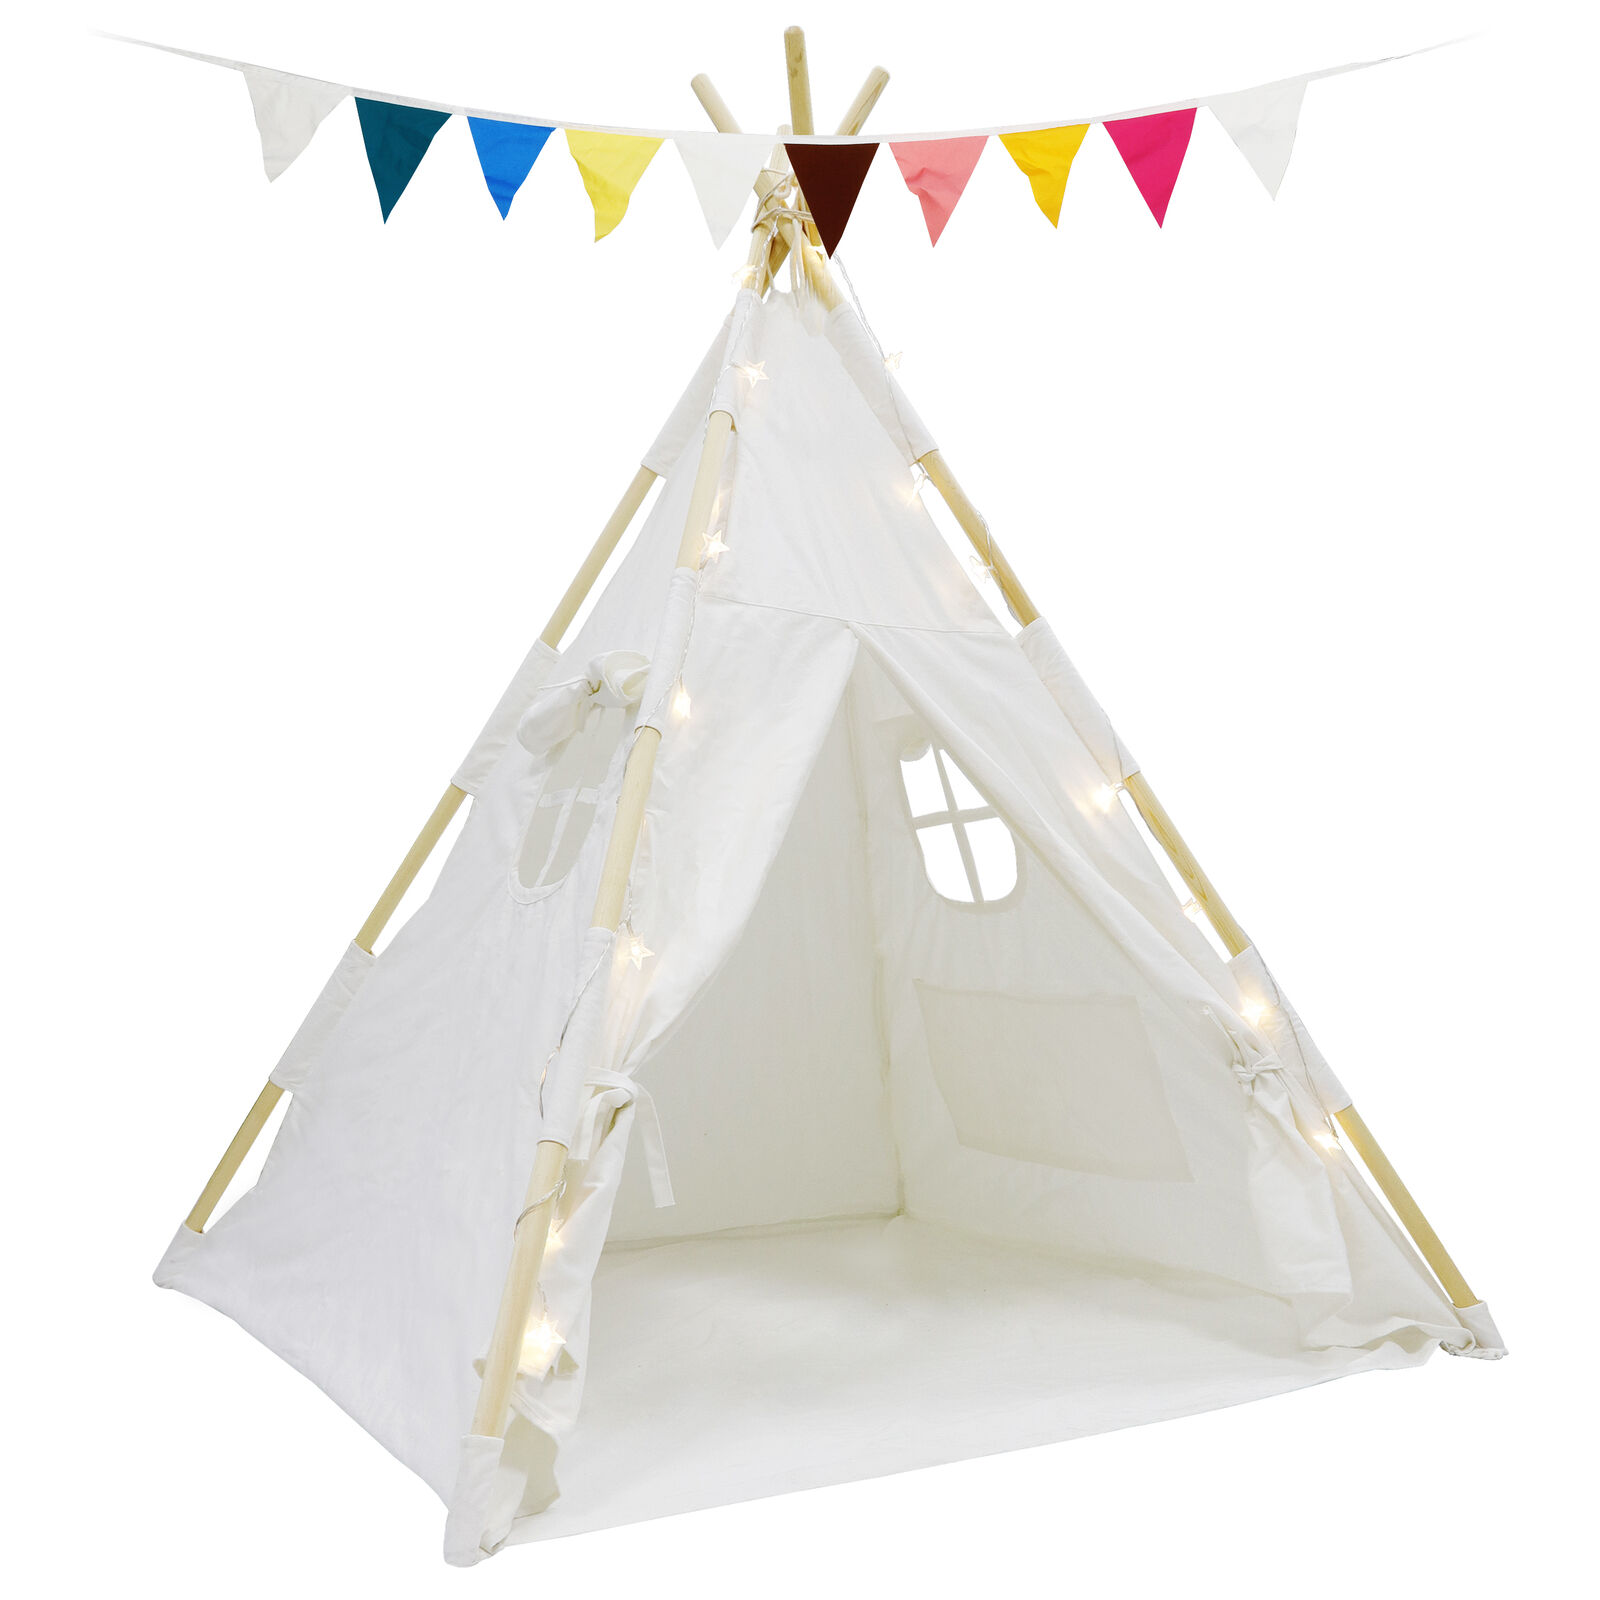 Kids Teepee Natural Cotton Play Tent Tents Playhouse Toddlers Fun W  Led Lights